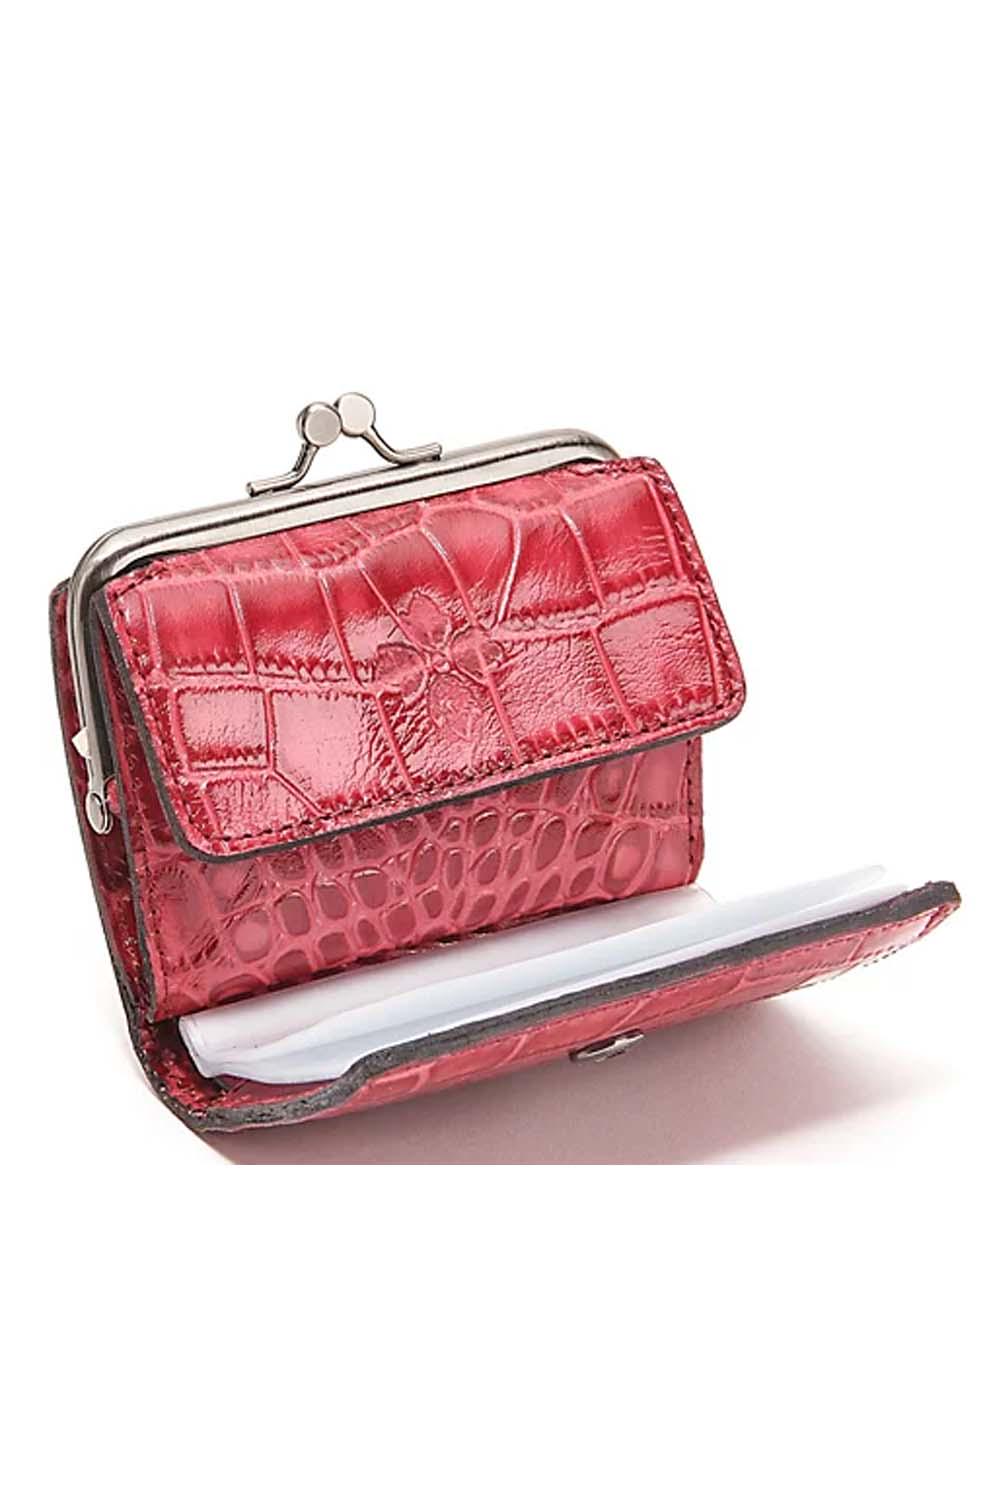 Patricia Nash Everly Quilted Nappa LeatherFramed Wallet ,Cinnamon